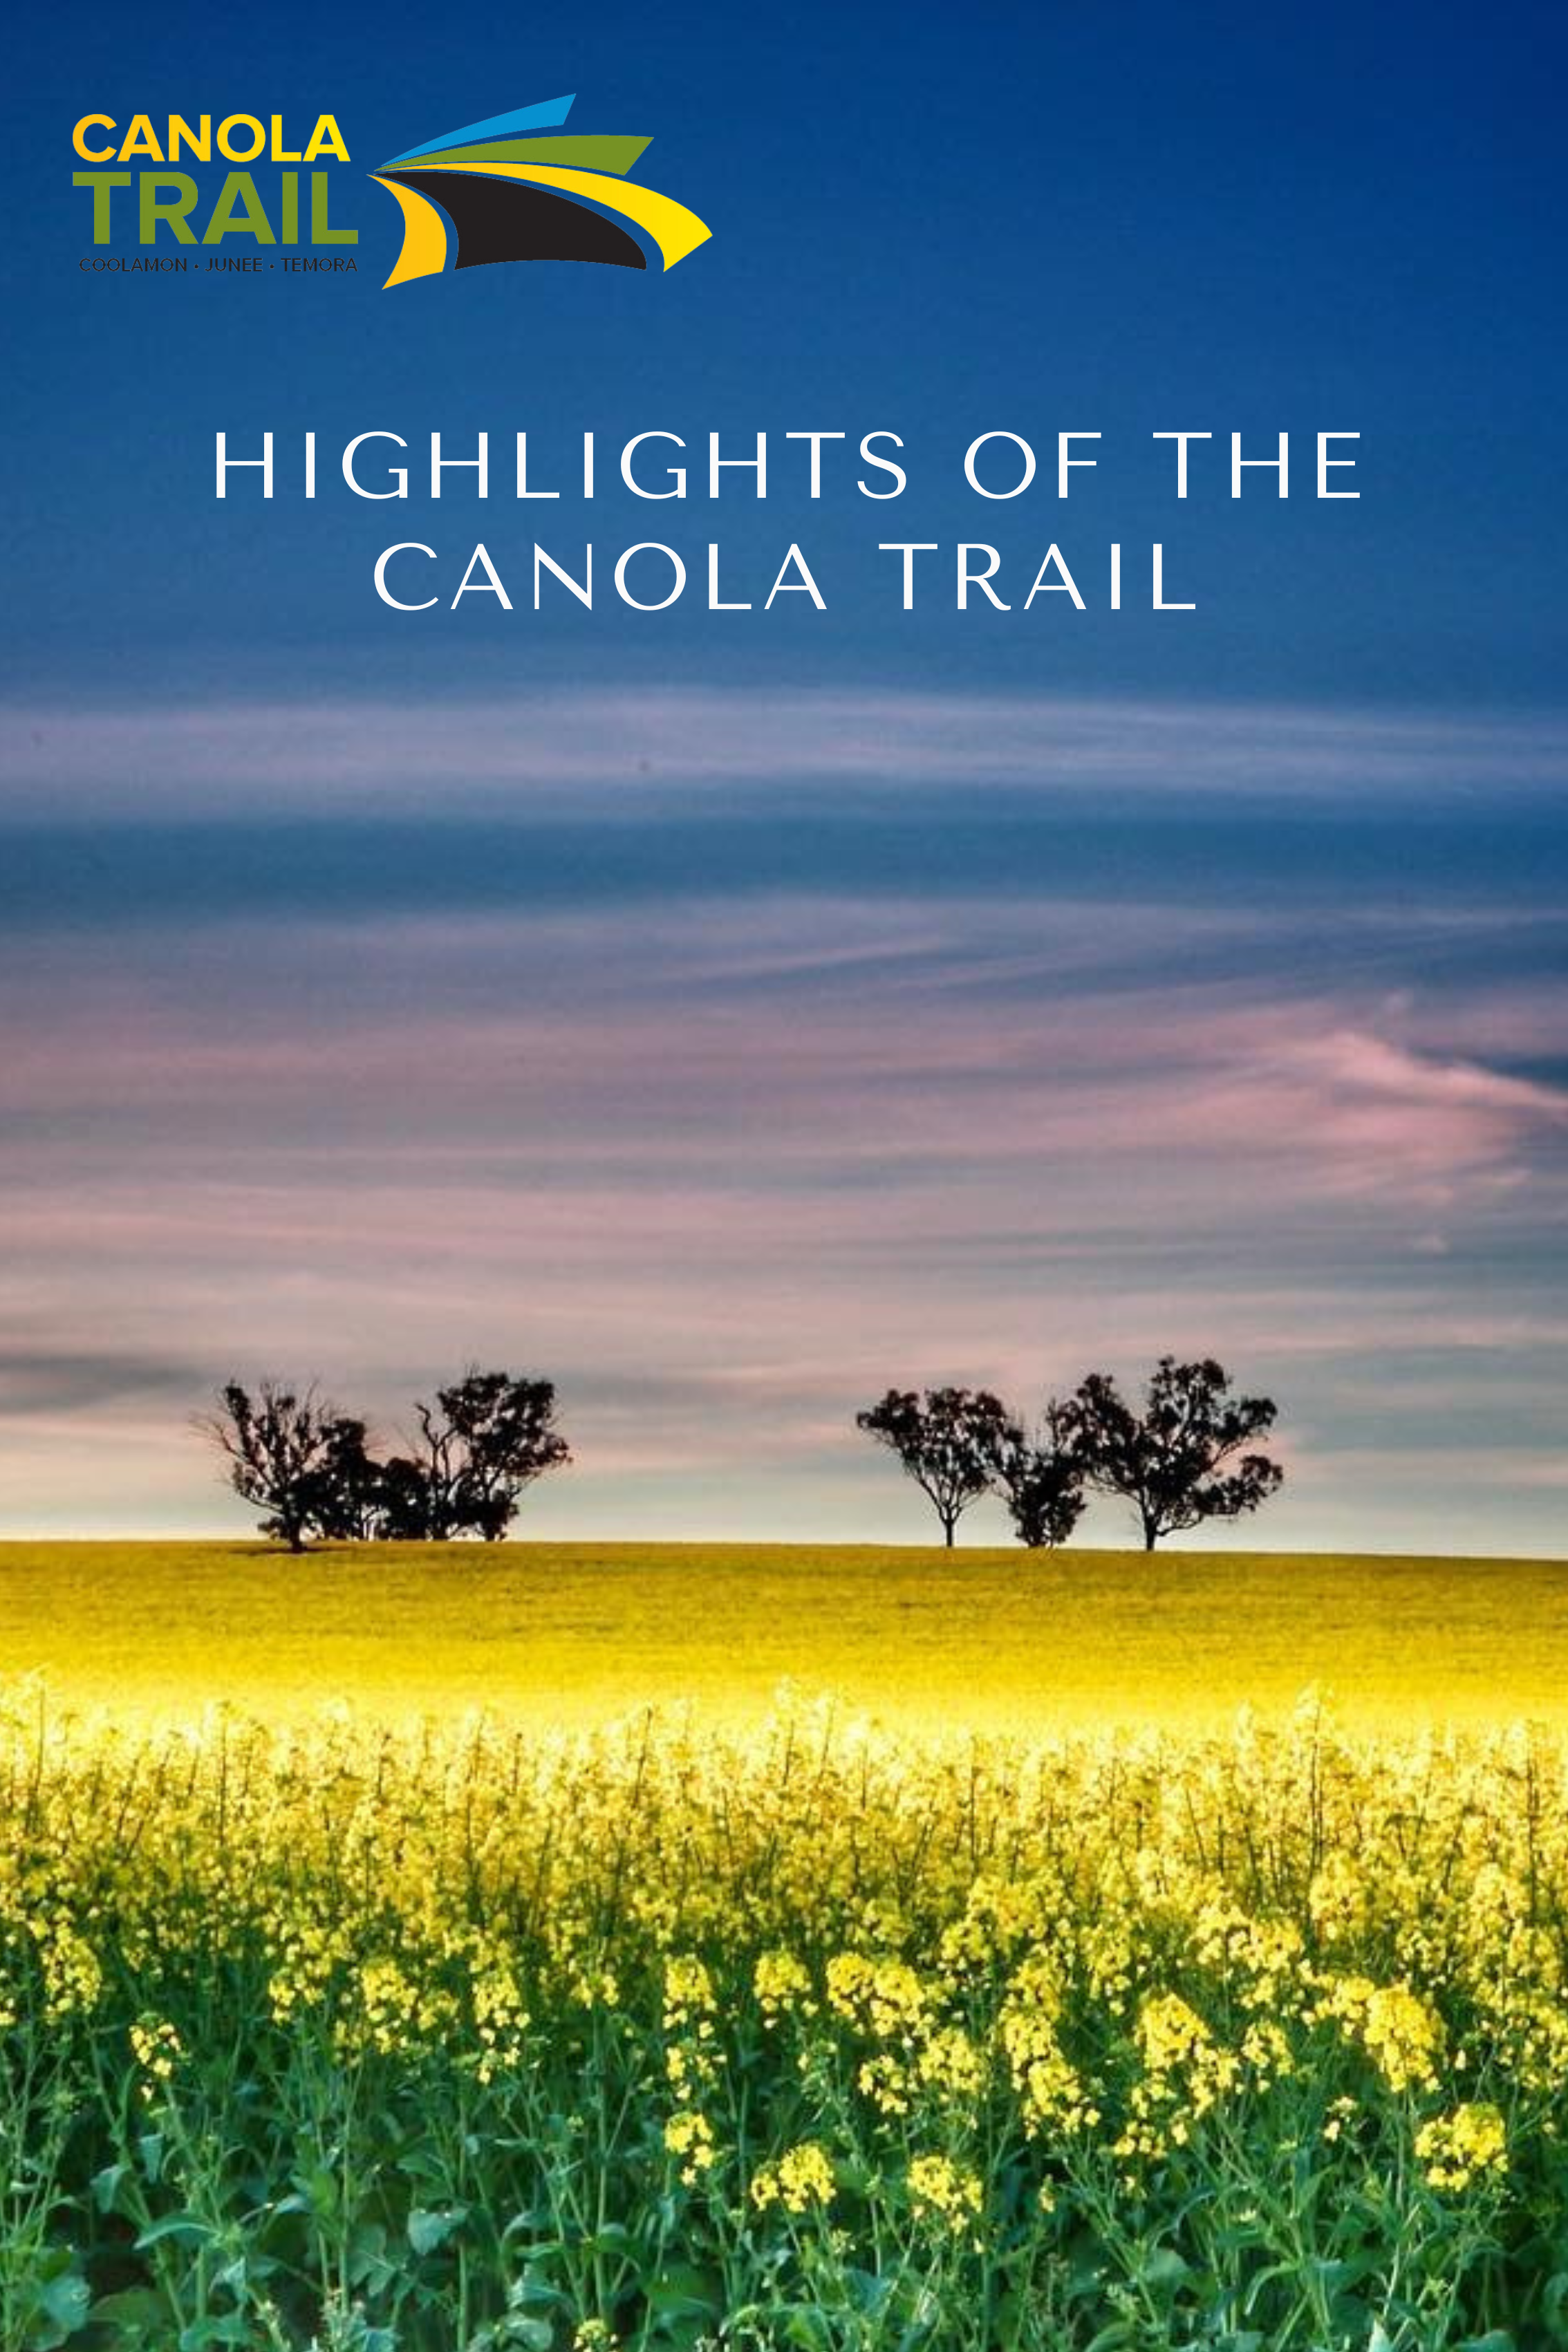 Highlights of the Canola Trail